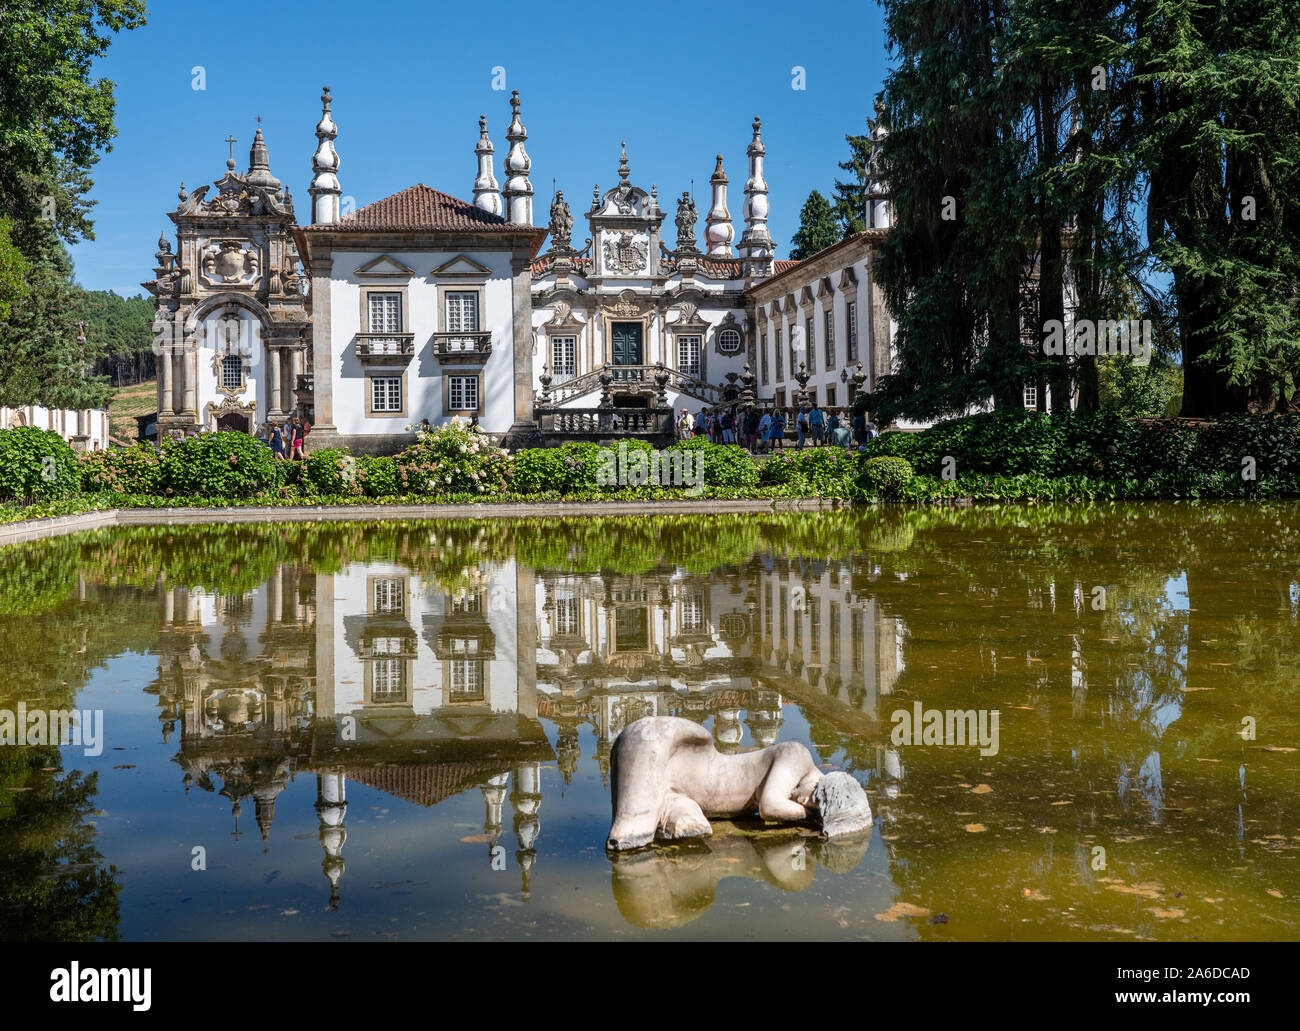 Vila Real, Portugal - 13 August 2019: Woman Sleeping statue in front of entrance of Mateus Palace in Vila Real, Portugal Stock Photo